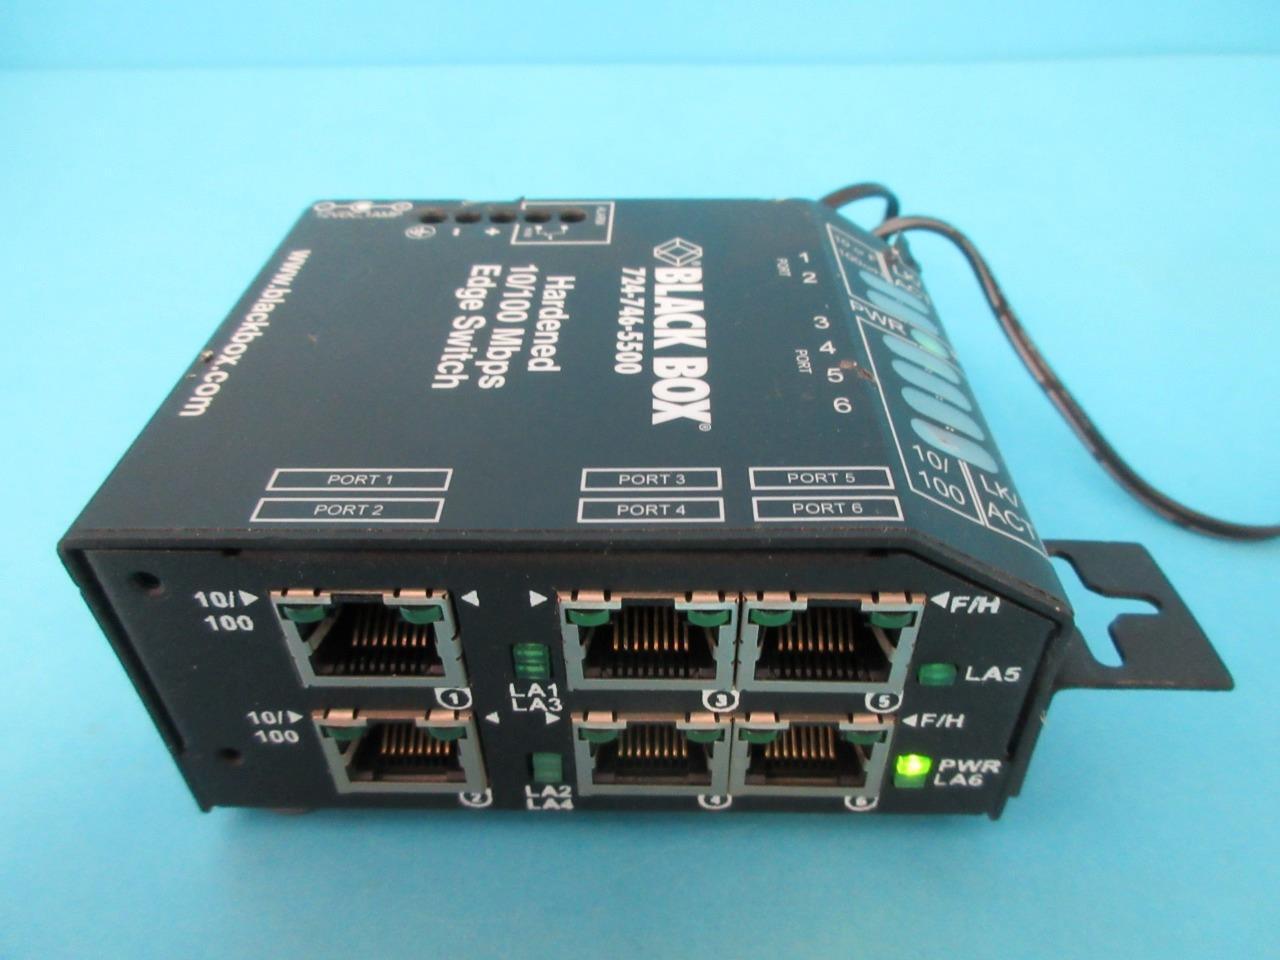 BLACK BOX LBH600A-H 24 HARDENED 10/100 MBBS EDGE SWITCH 6 PORT WORKS GREAT